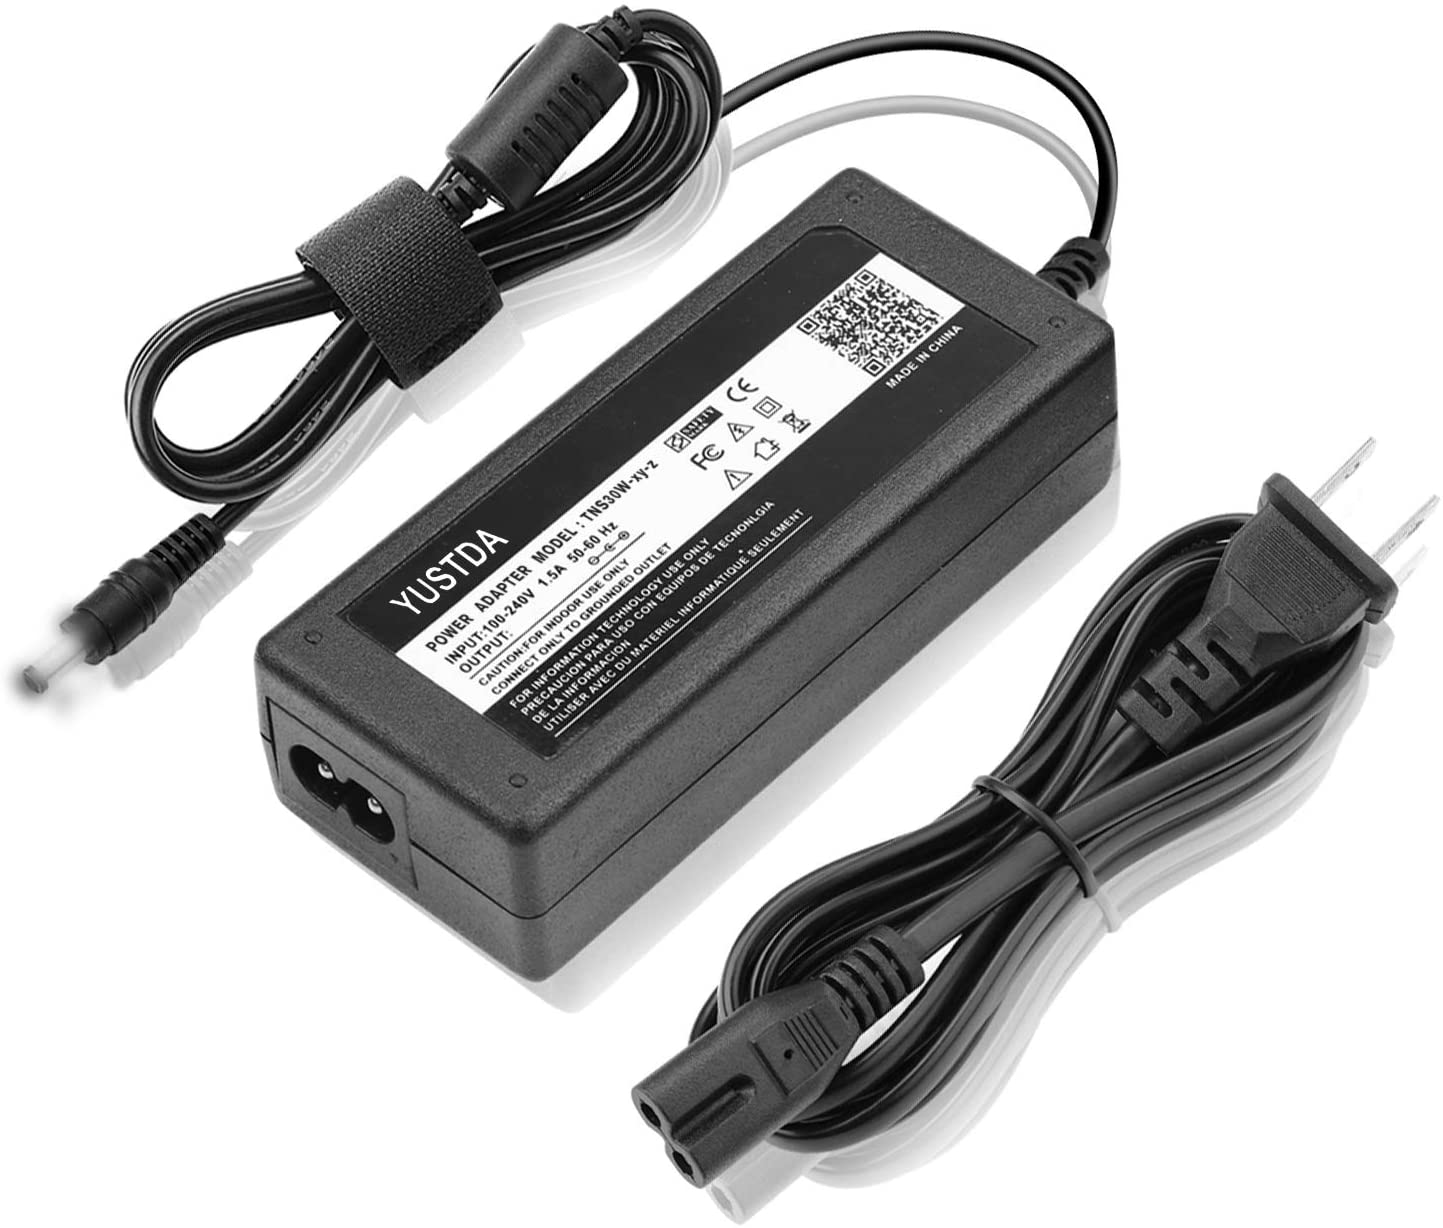 10Ft New AC/DC Adapter Replacement for ViewSonic VX2270SMH-LED VS15052, VX2370 VX2370S-LED VS14880 VX2376-smhd 23", VS13814, VX2253mh-LED, V3D245 VS13777 VX2776-smhd, APD Asian Power Devices DA-40A19 - image 1 of 5